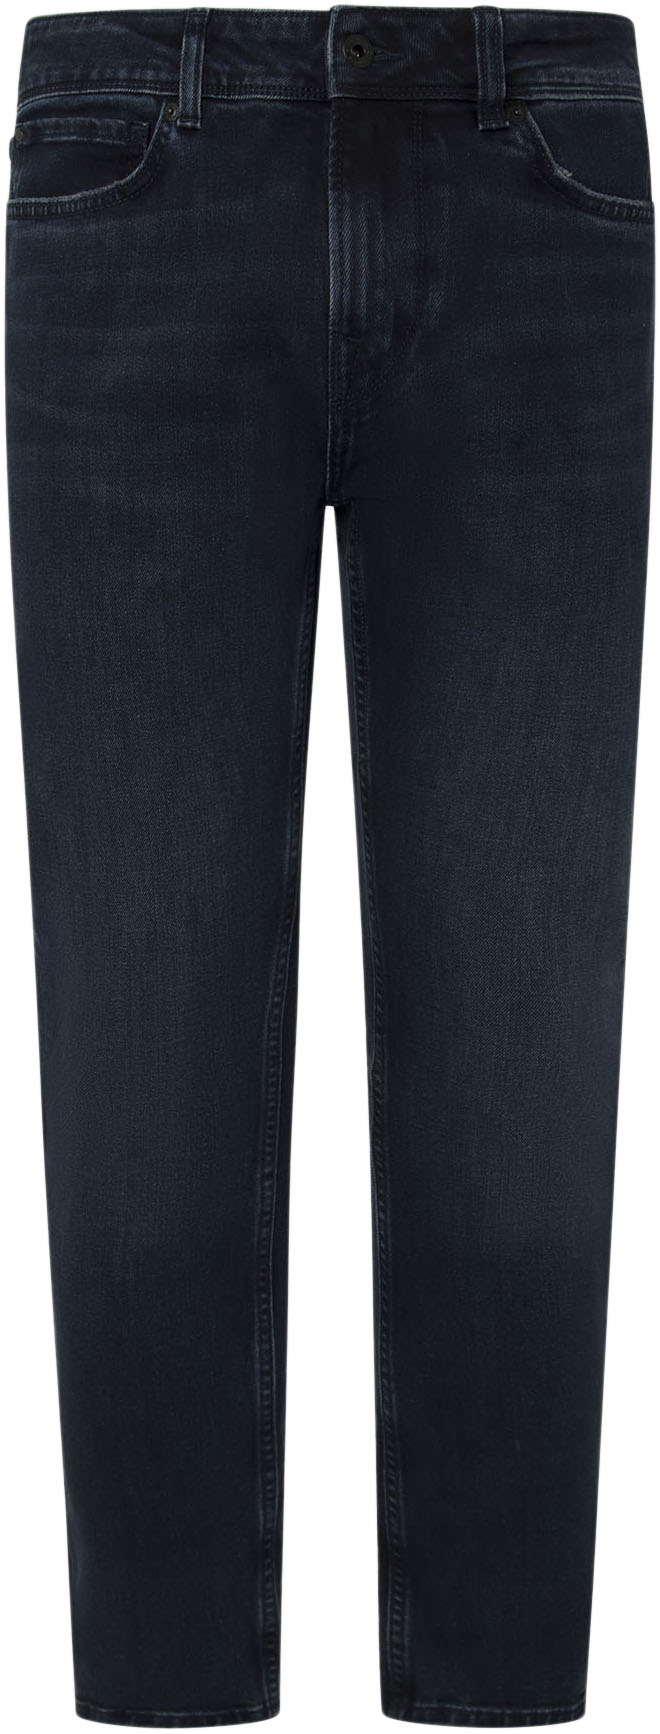 Pepe Jeans Skinny-fit-Jeans »SKINNY JEANS« von Pepe Jeans